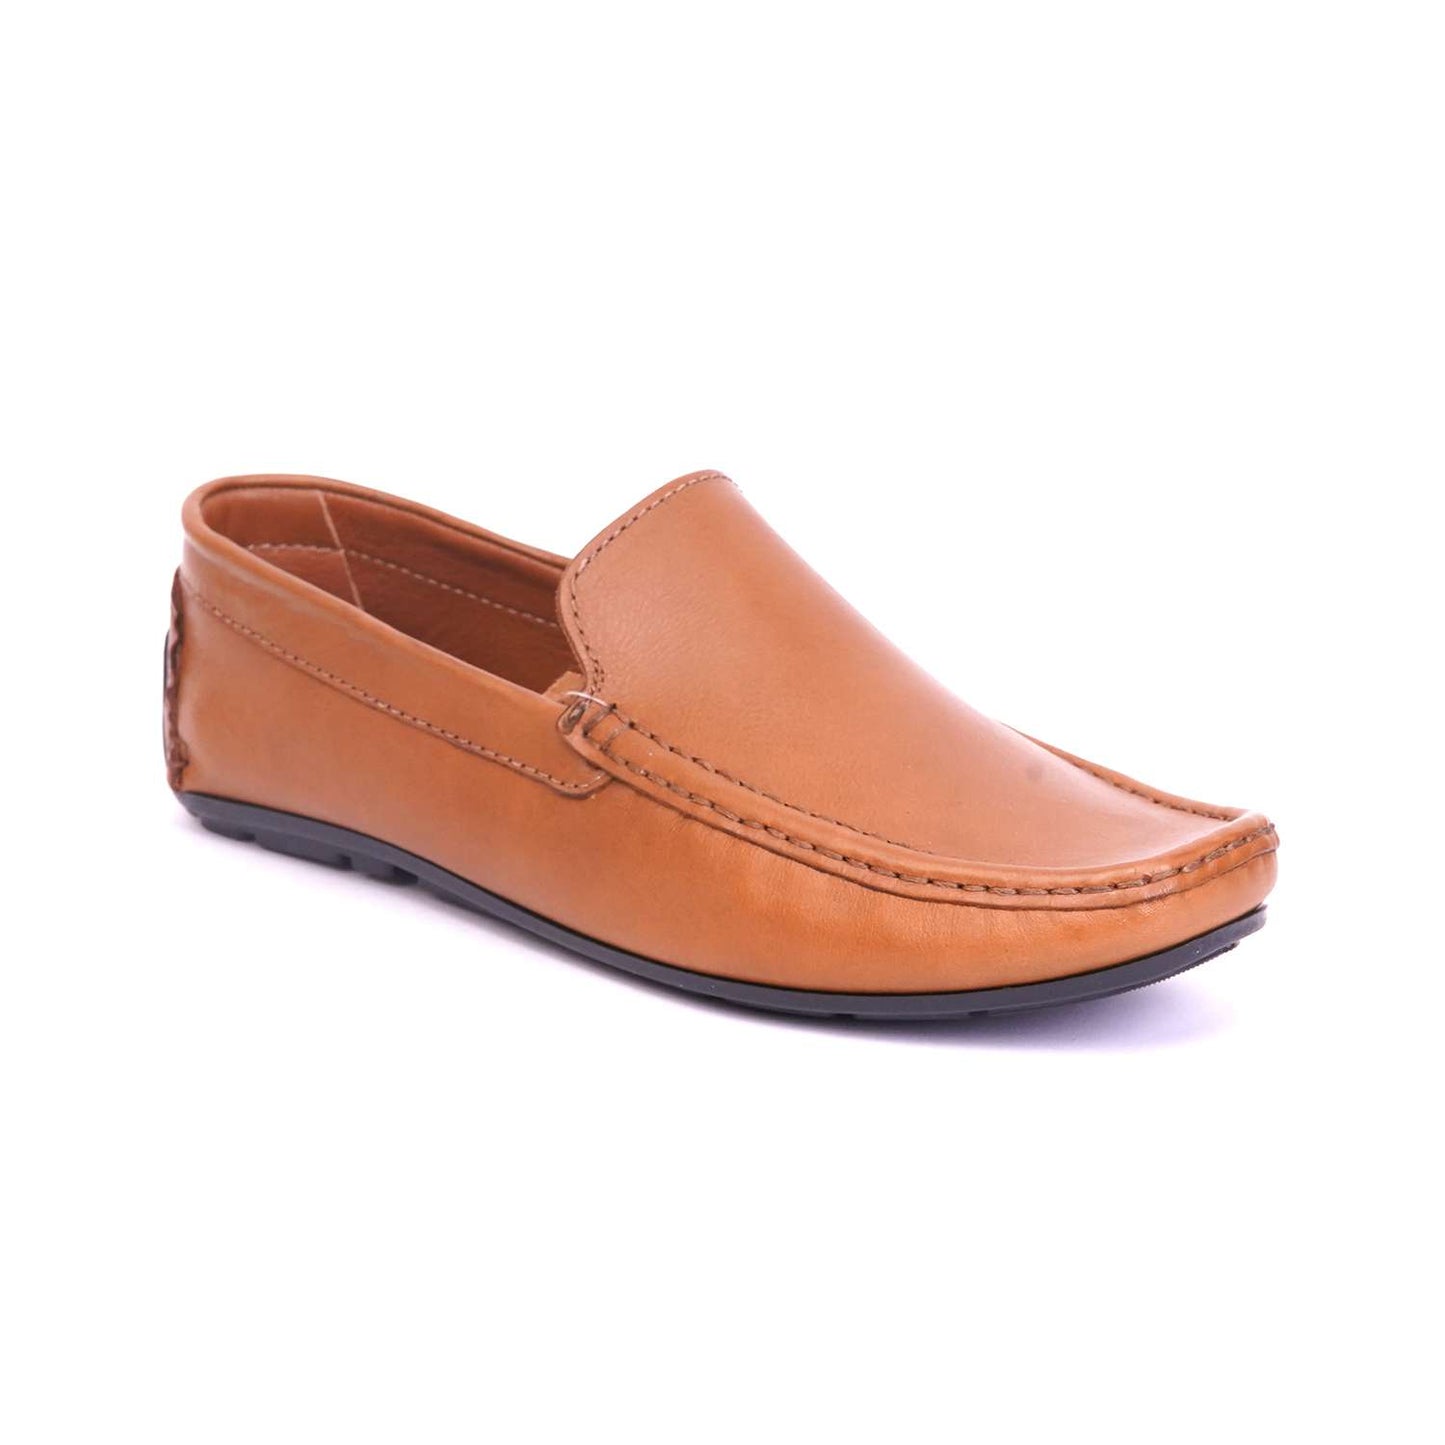 Day-To-Day Basic Loafers